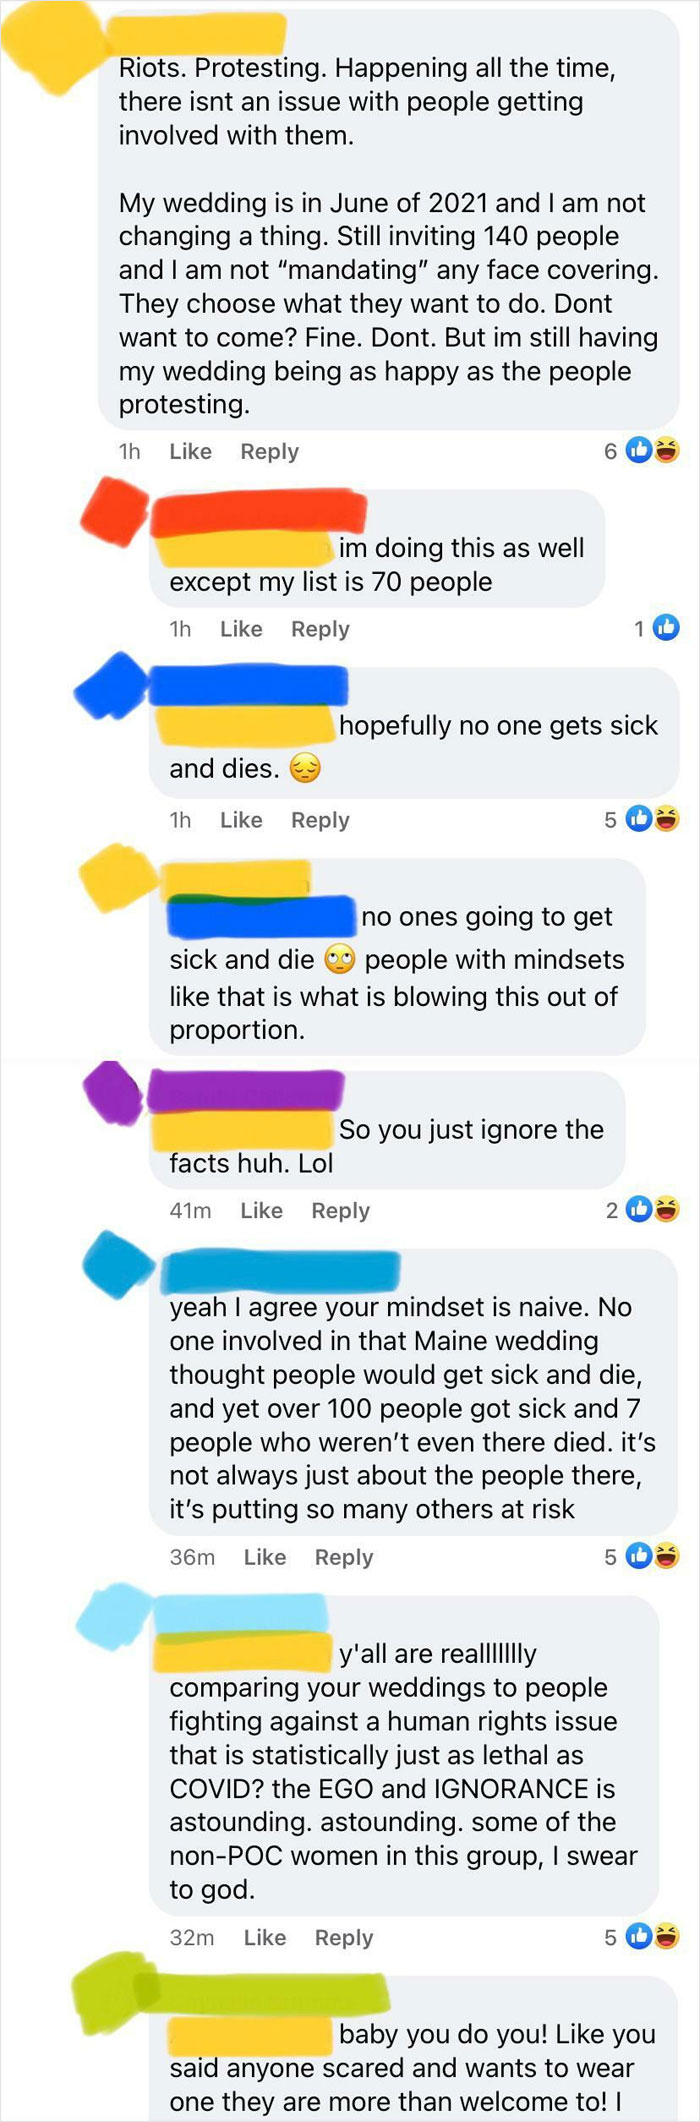 Another Bride Comparing Her Wedding To Protests